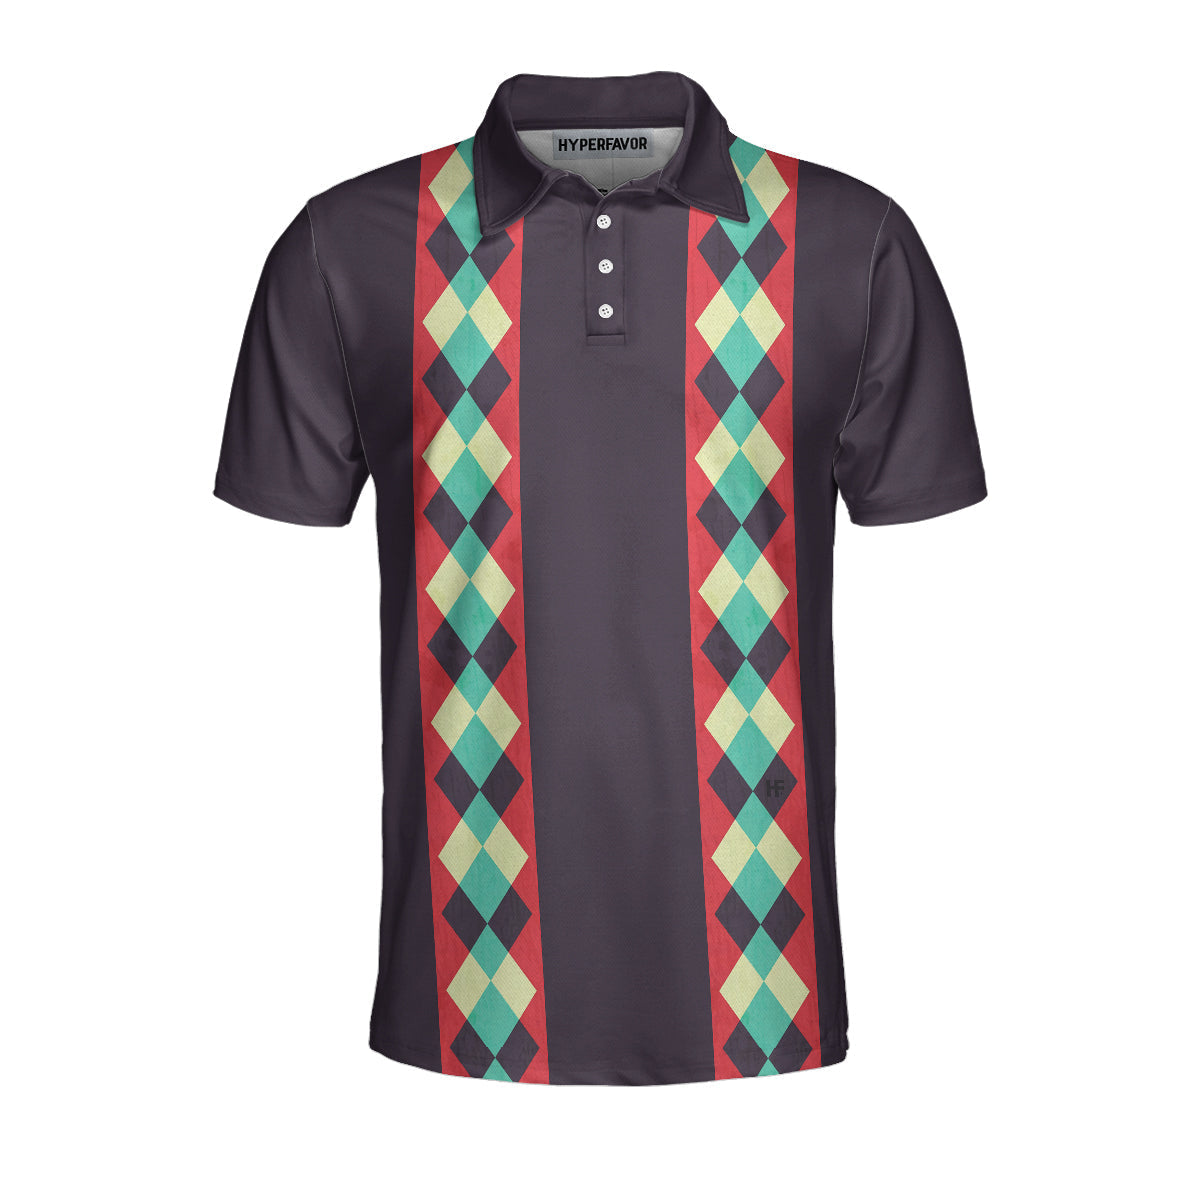 Splits Happen Bowling Polo Shirt/ Plaid Pattern Polo Bowling Style Shirt For Male Bowlers/ Simple Shirt Design Coolspod